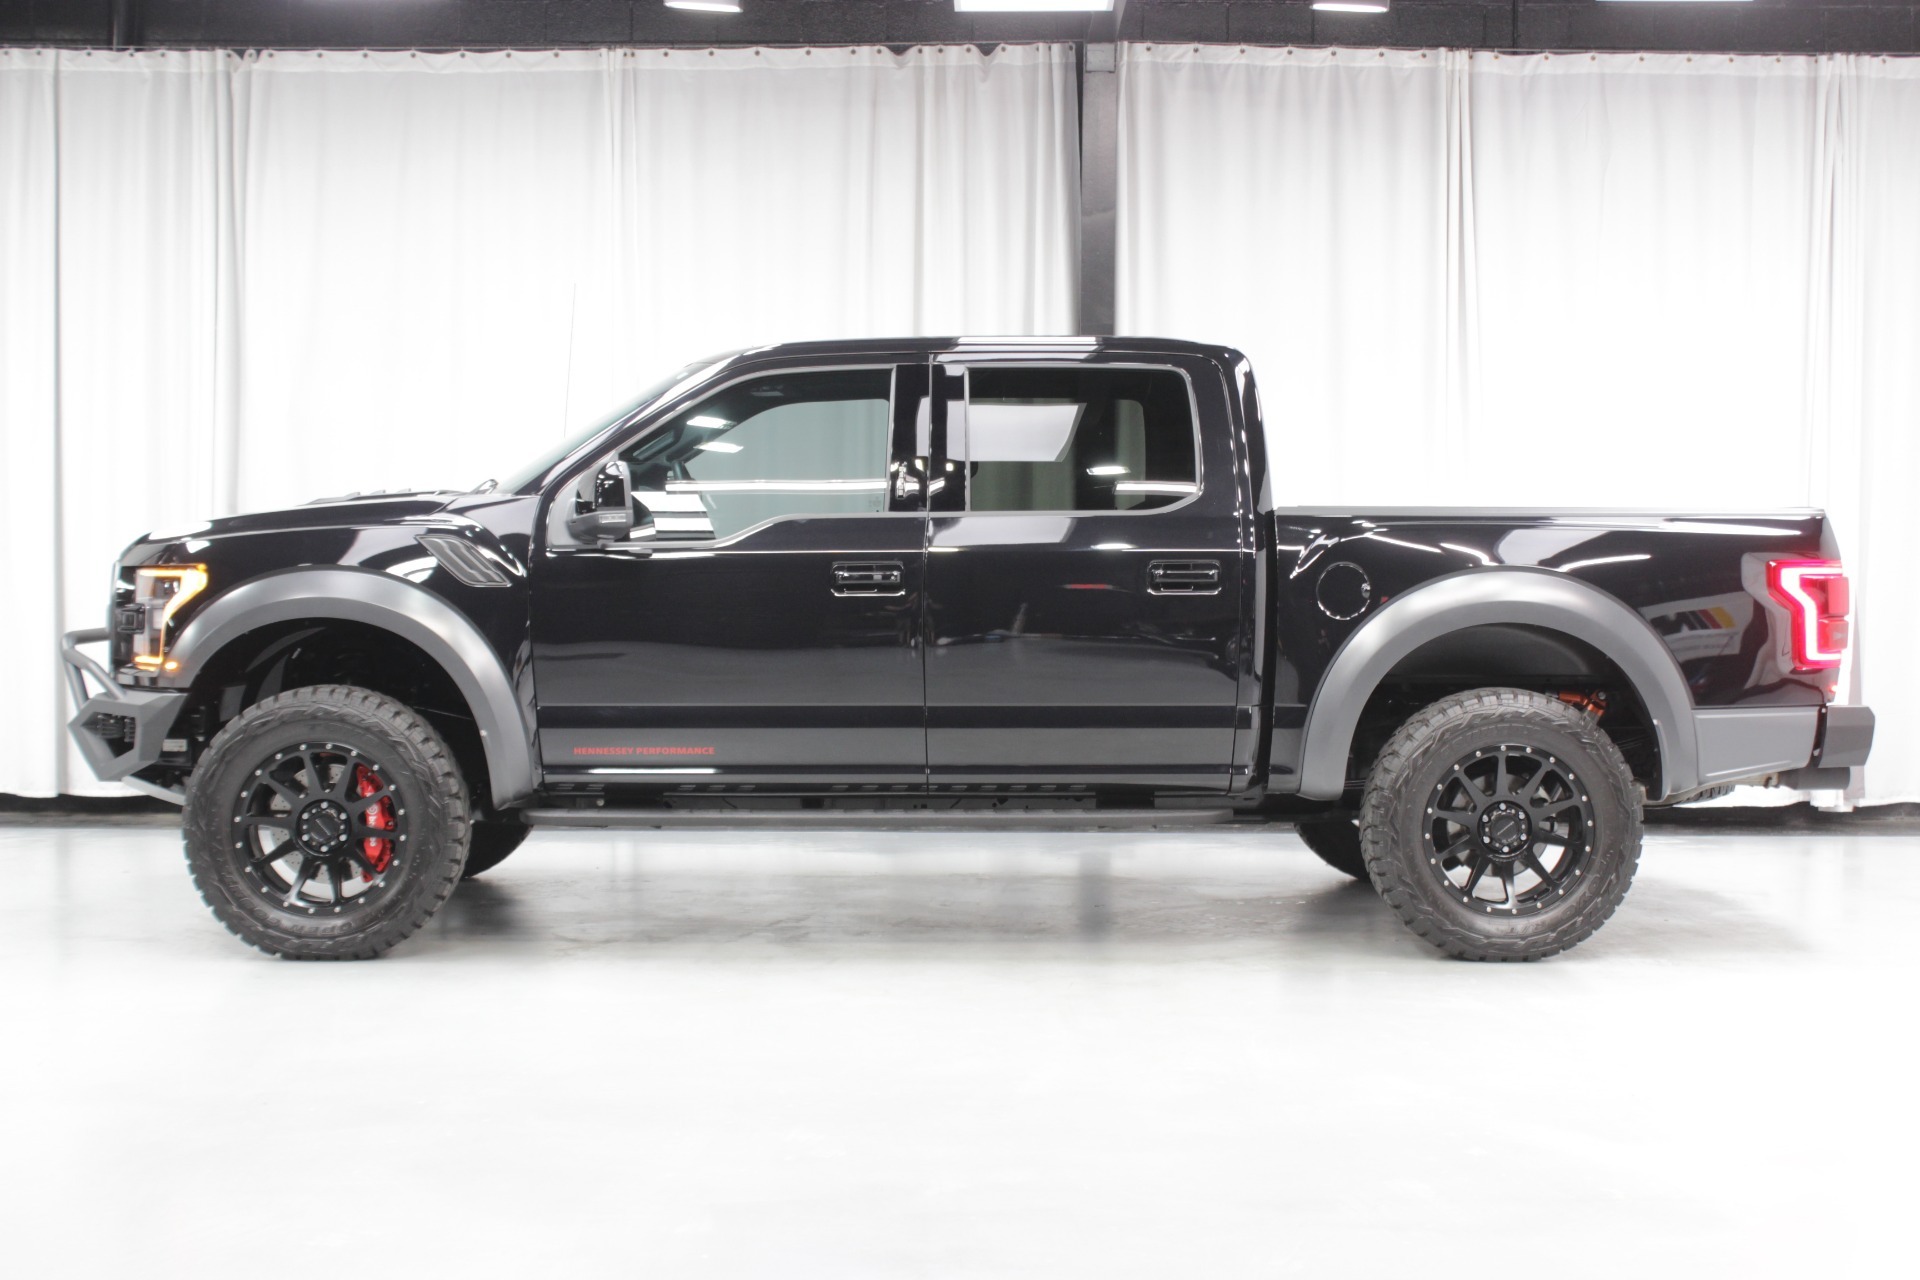 Used 2019 Ford F-150 RAPTOR 4x4 HENNESSY VELOCIRAPTOR VR600 UPGRADE (600HP) for sale Sold at Formula Imports in Charlotte NC 28227 3